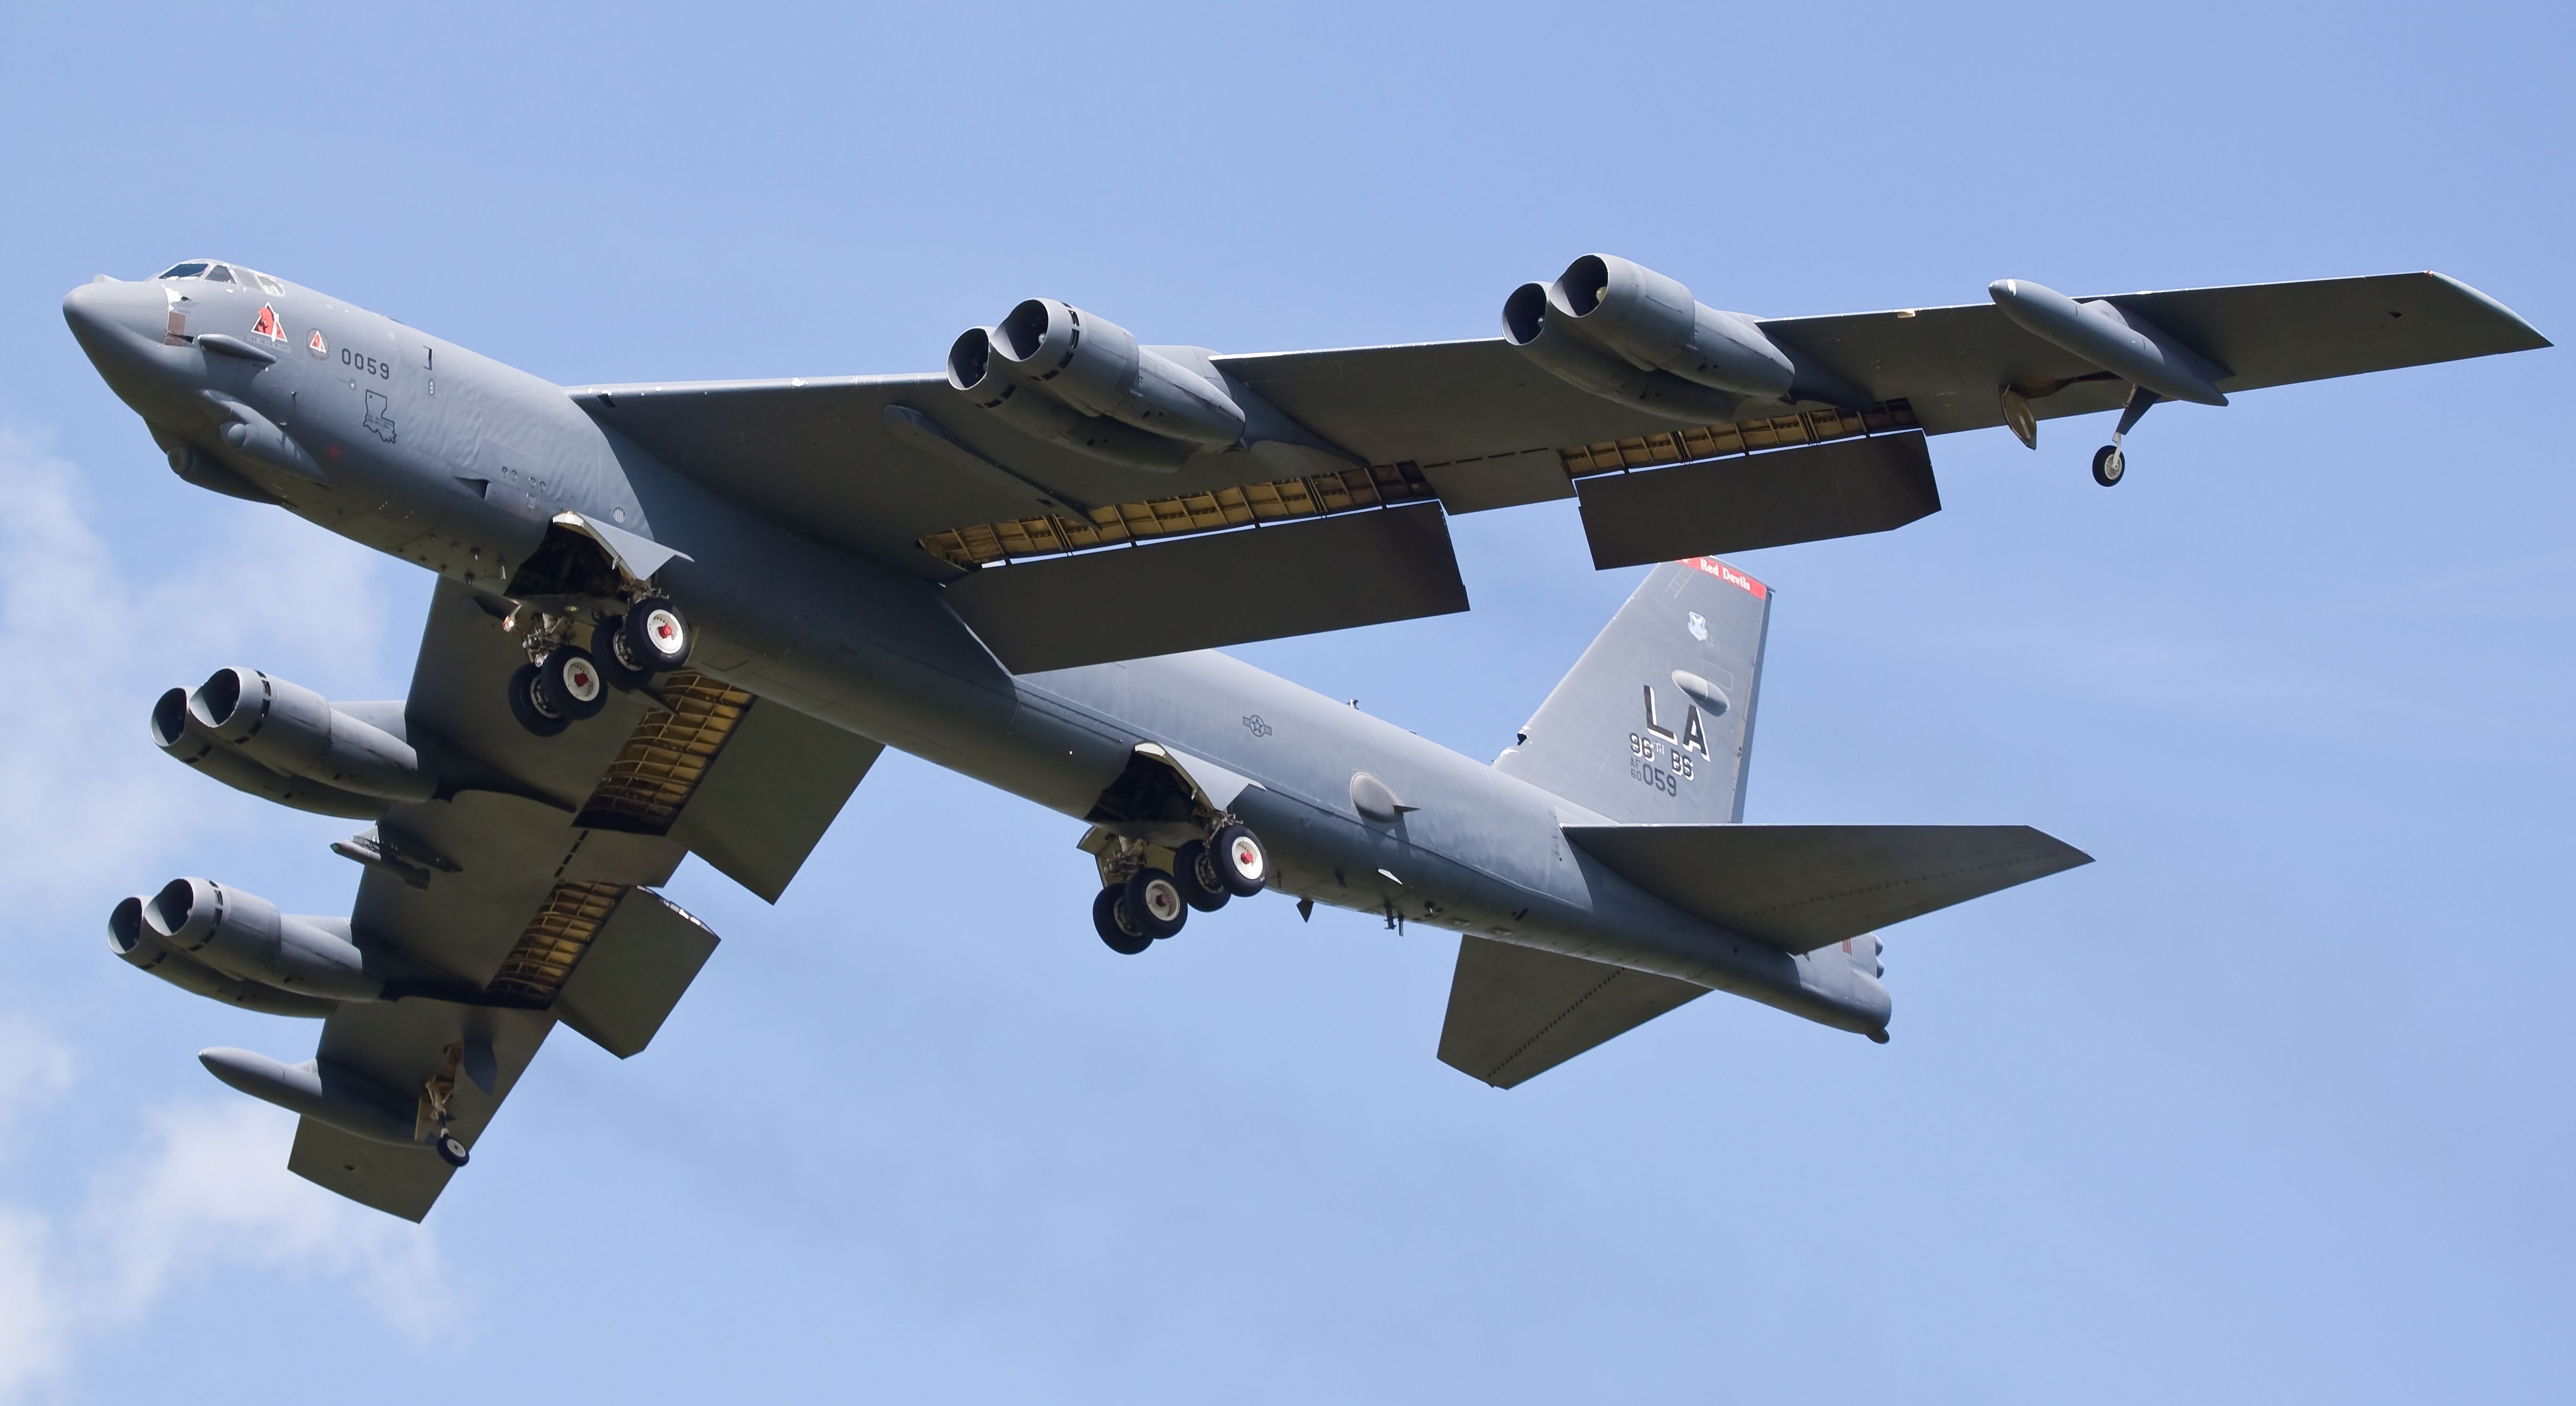 A Boeing B-52 Stratofortess flying in the sky.